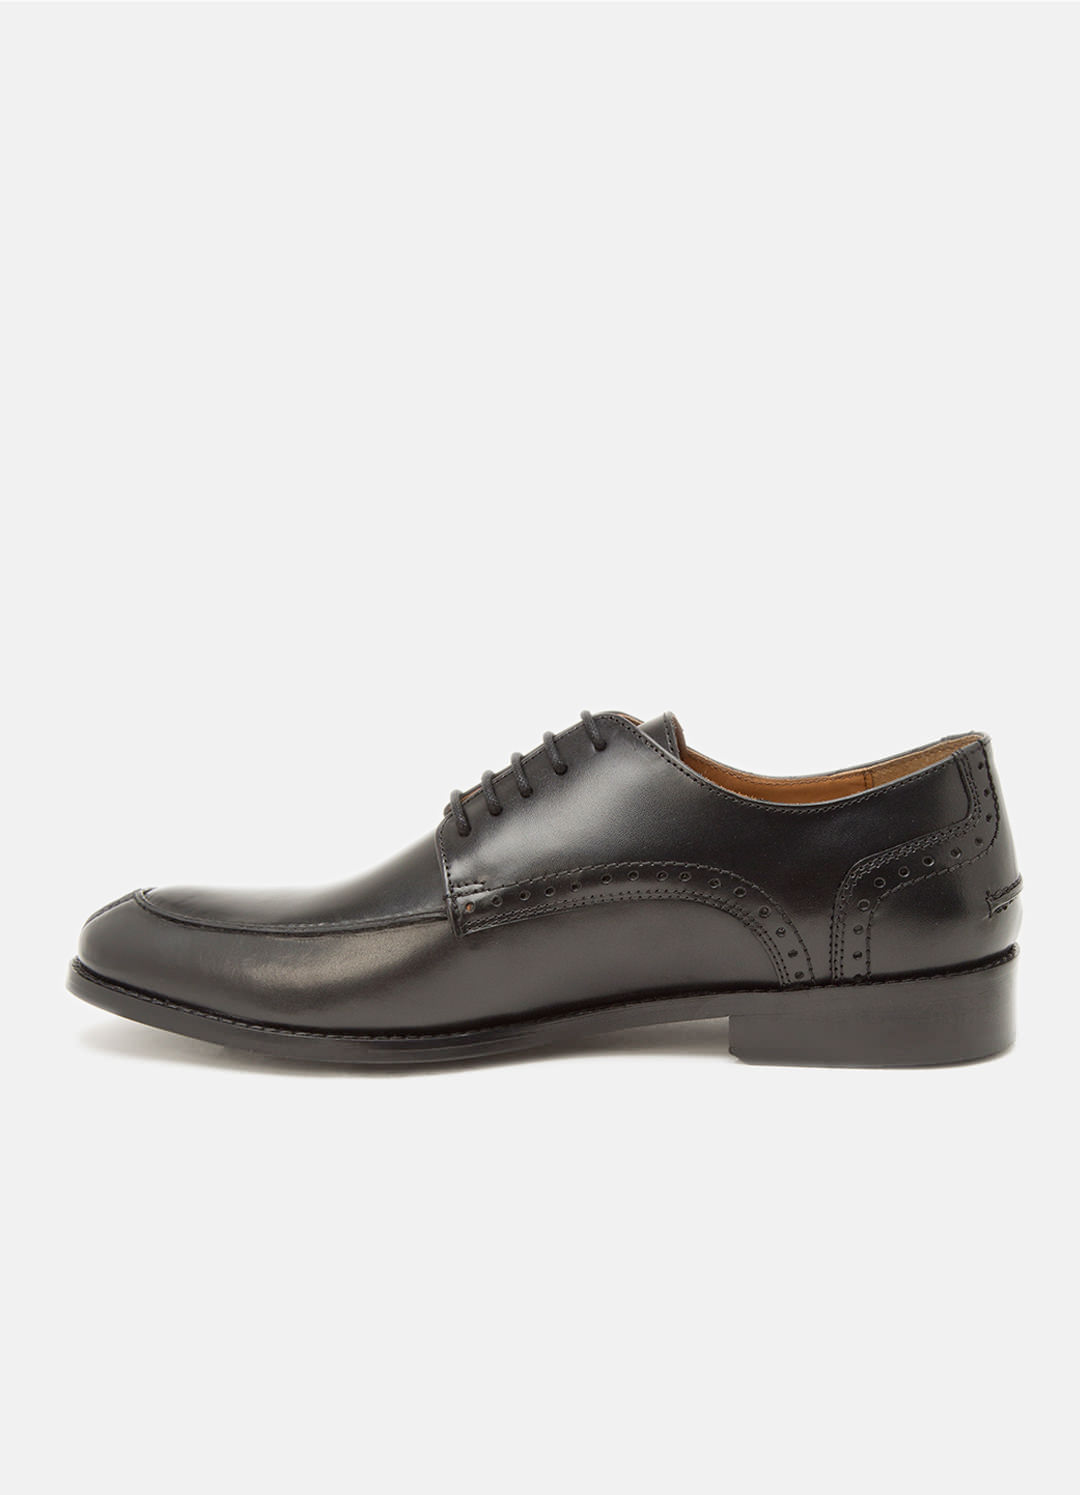 Genuine Leather Black Derby Shoes | Hats Off Accessories